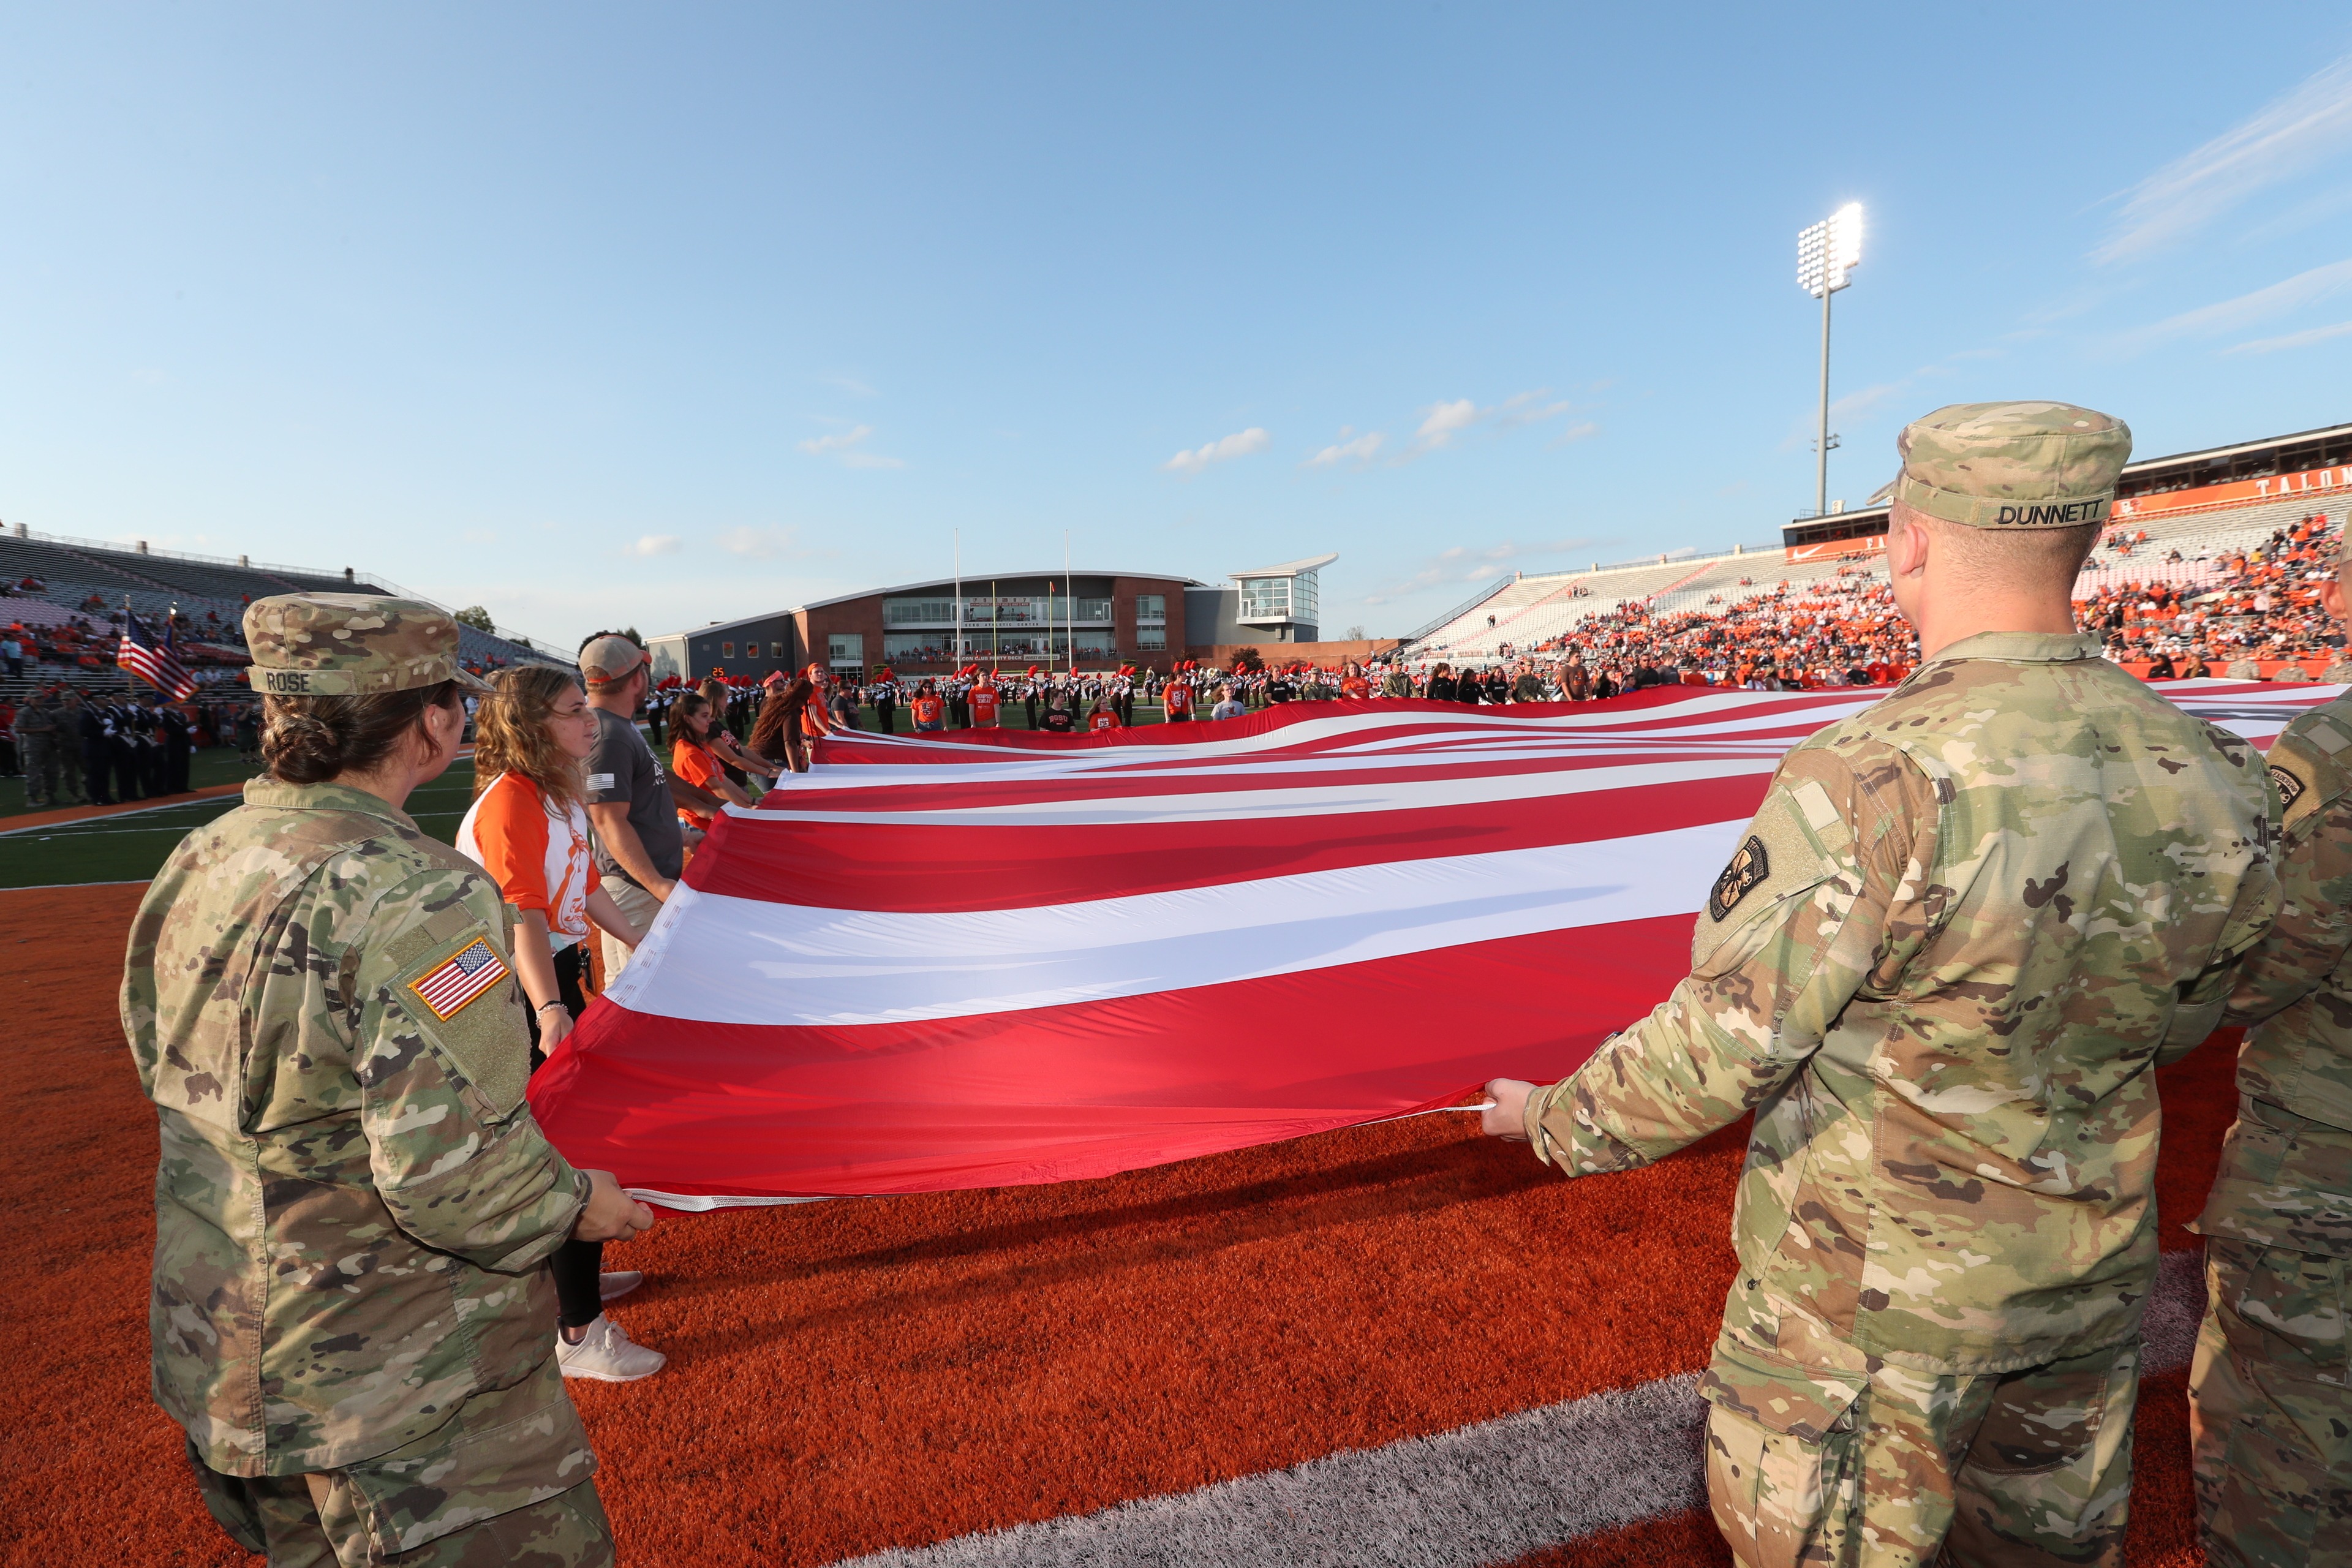 BGSU is top-ranked nationally for its support of veterans and active military students.